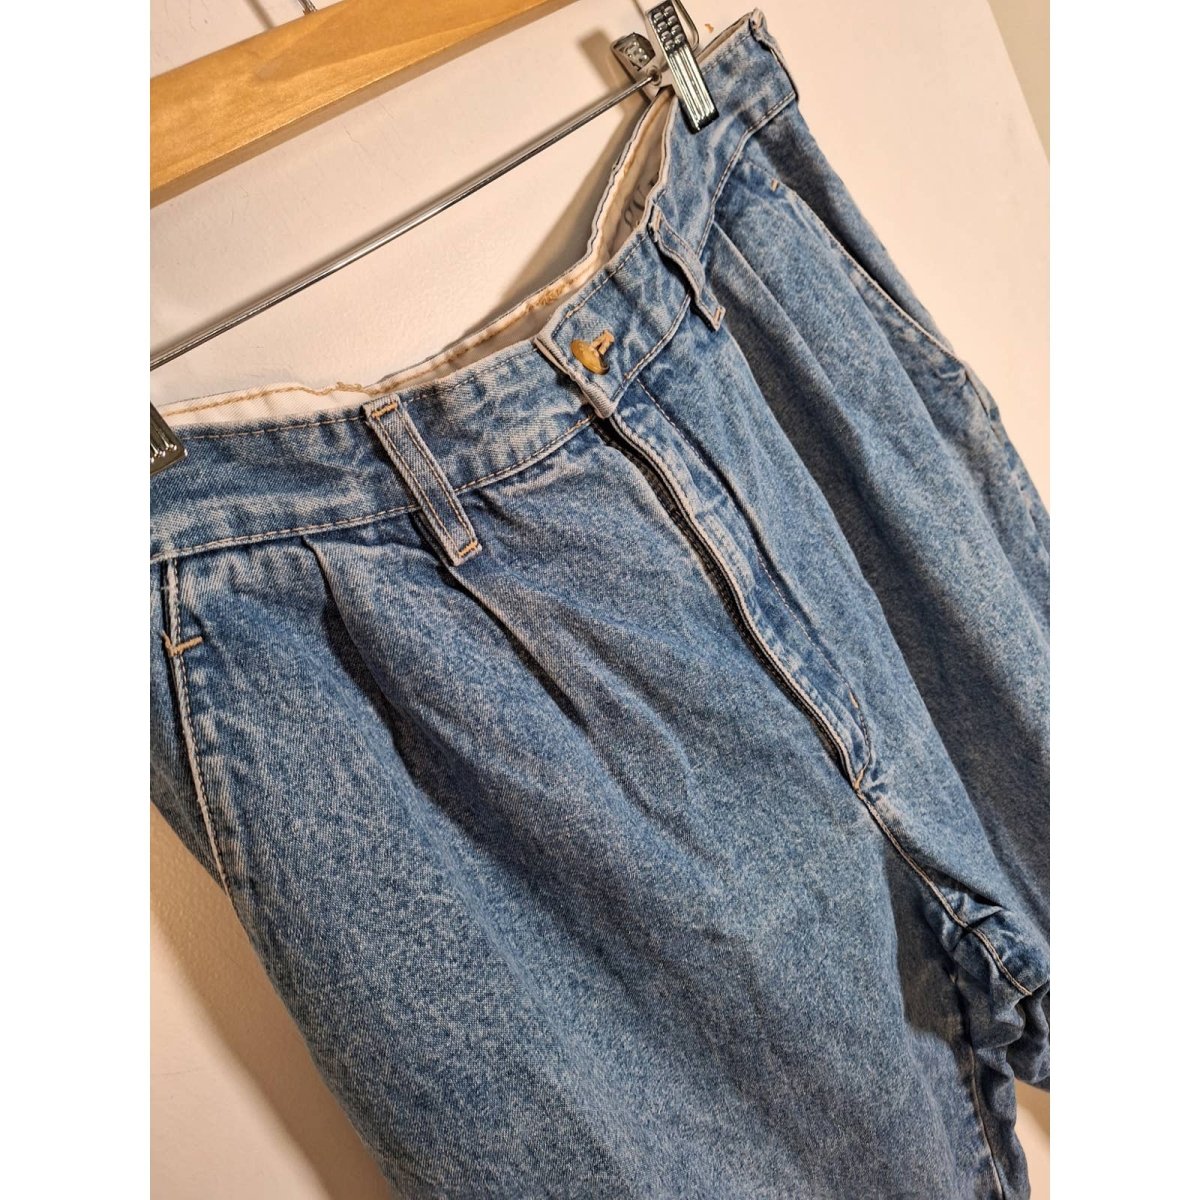 Vintage 80s/90s Pleated Denim Trousers Size 32x29 - themallvintage The Mall Vintage